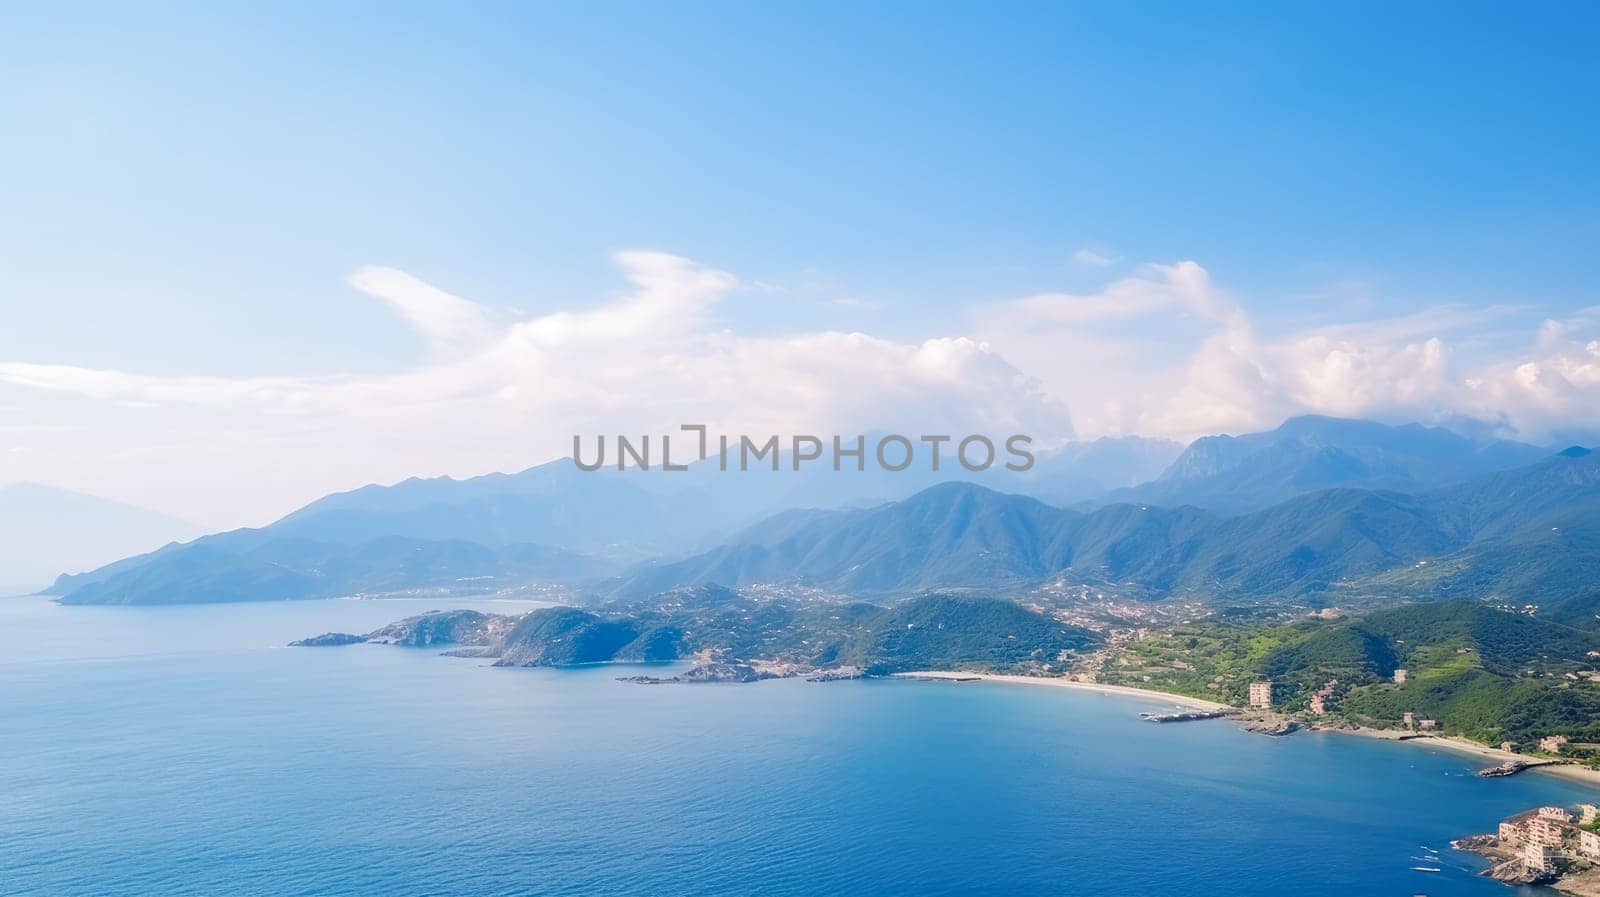 Beautiful blue water landscape, sky and mountains. Beautiful landscape, picture, phone screensaver, copy space, advertising, travel agency, tourism, solitude with nature, without people.